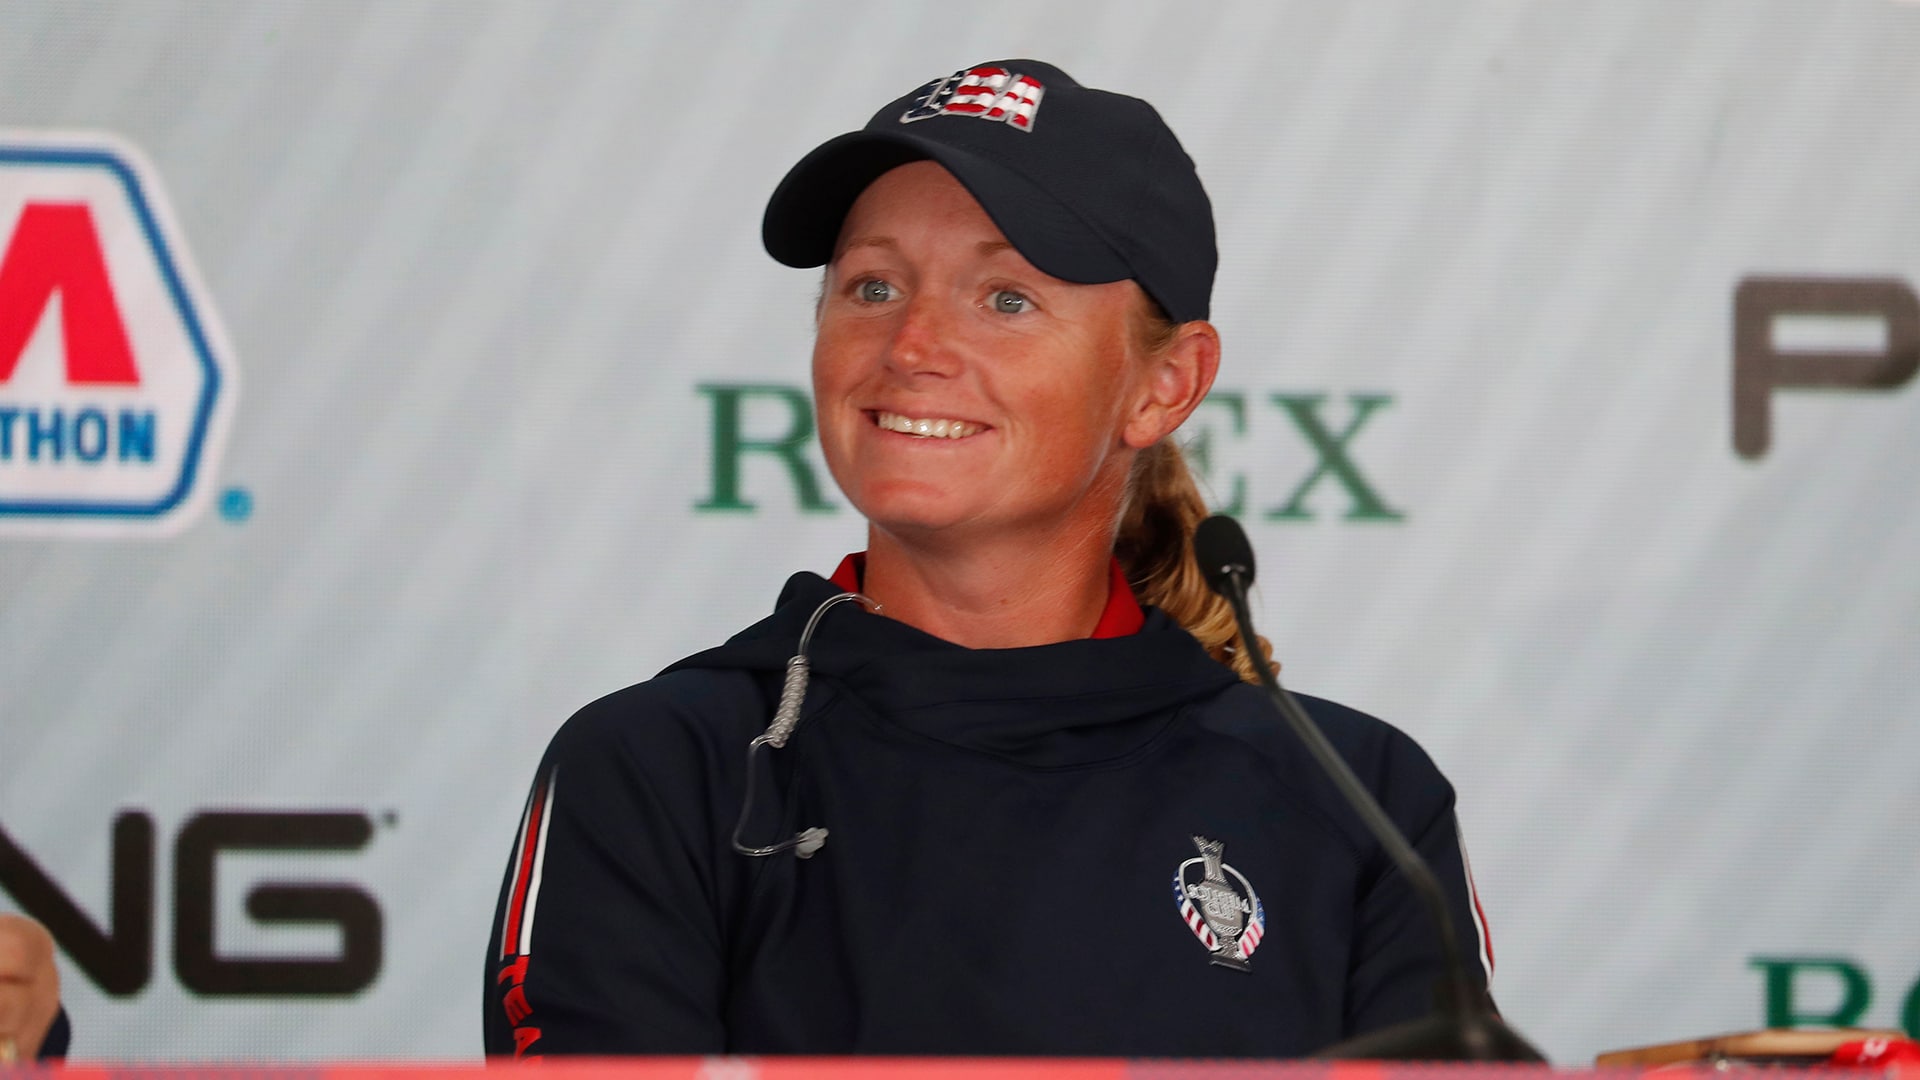 Stacy Lewis will now captain U.S. Solheim Cup team in back-to-back years